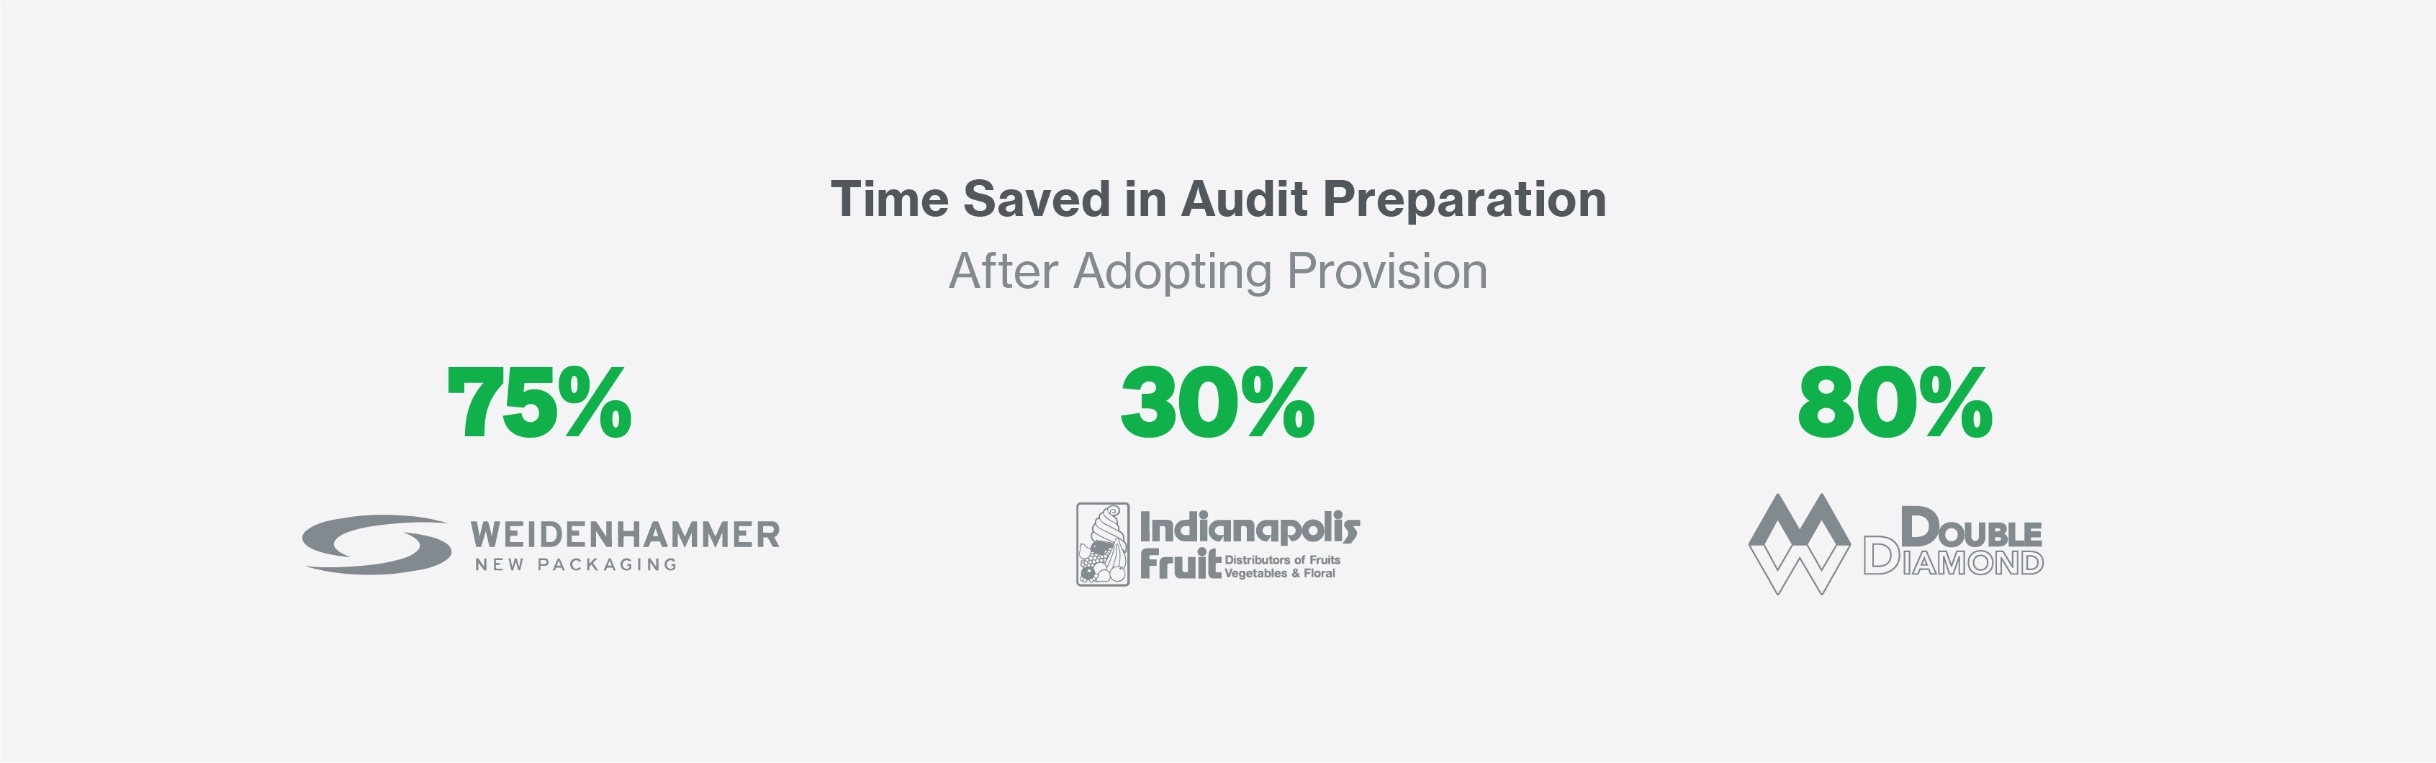 pic-time-saved-in-audit-preparation-after-adopting-provision-2436x763